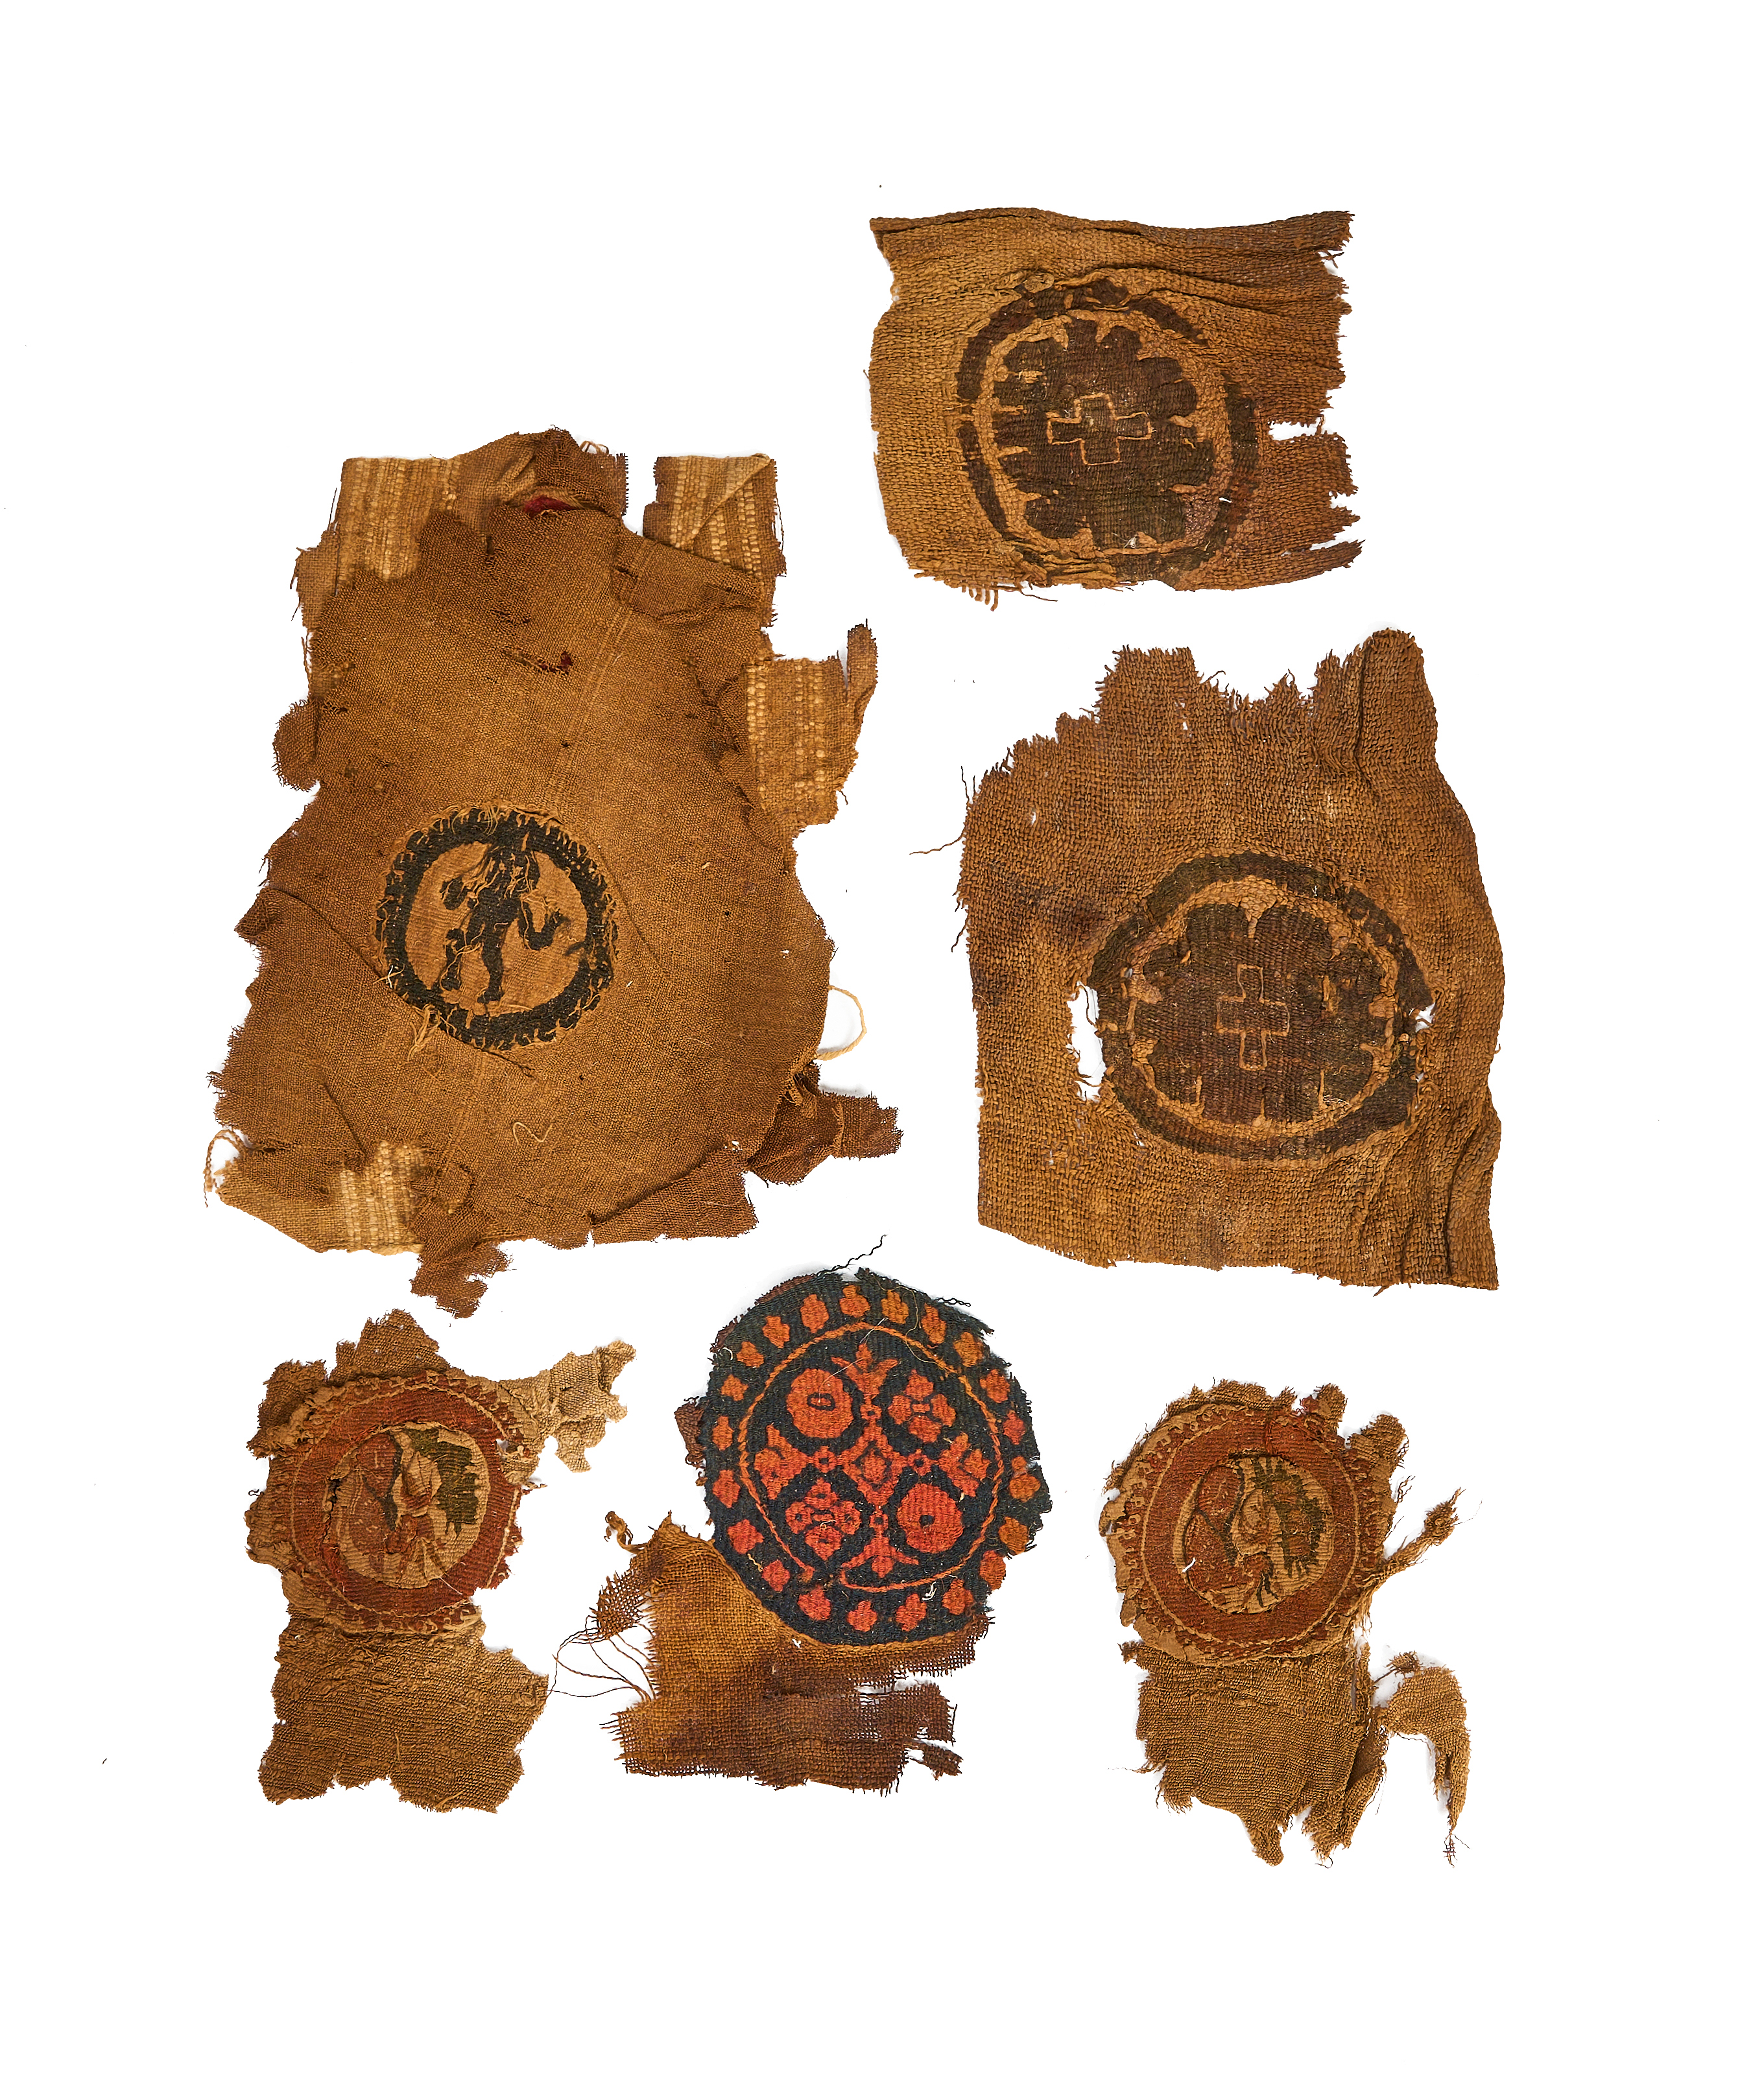 SIX COPTIC WOOL AND LINEN TEXTILE FRAGMENTS CIRCA 5TH-9TH CENTURY A.D.